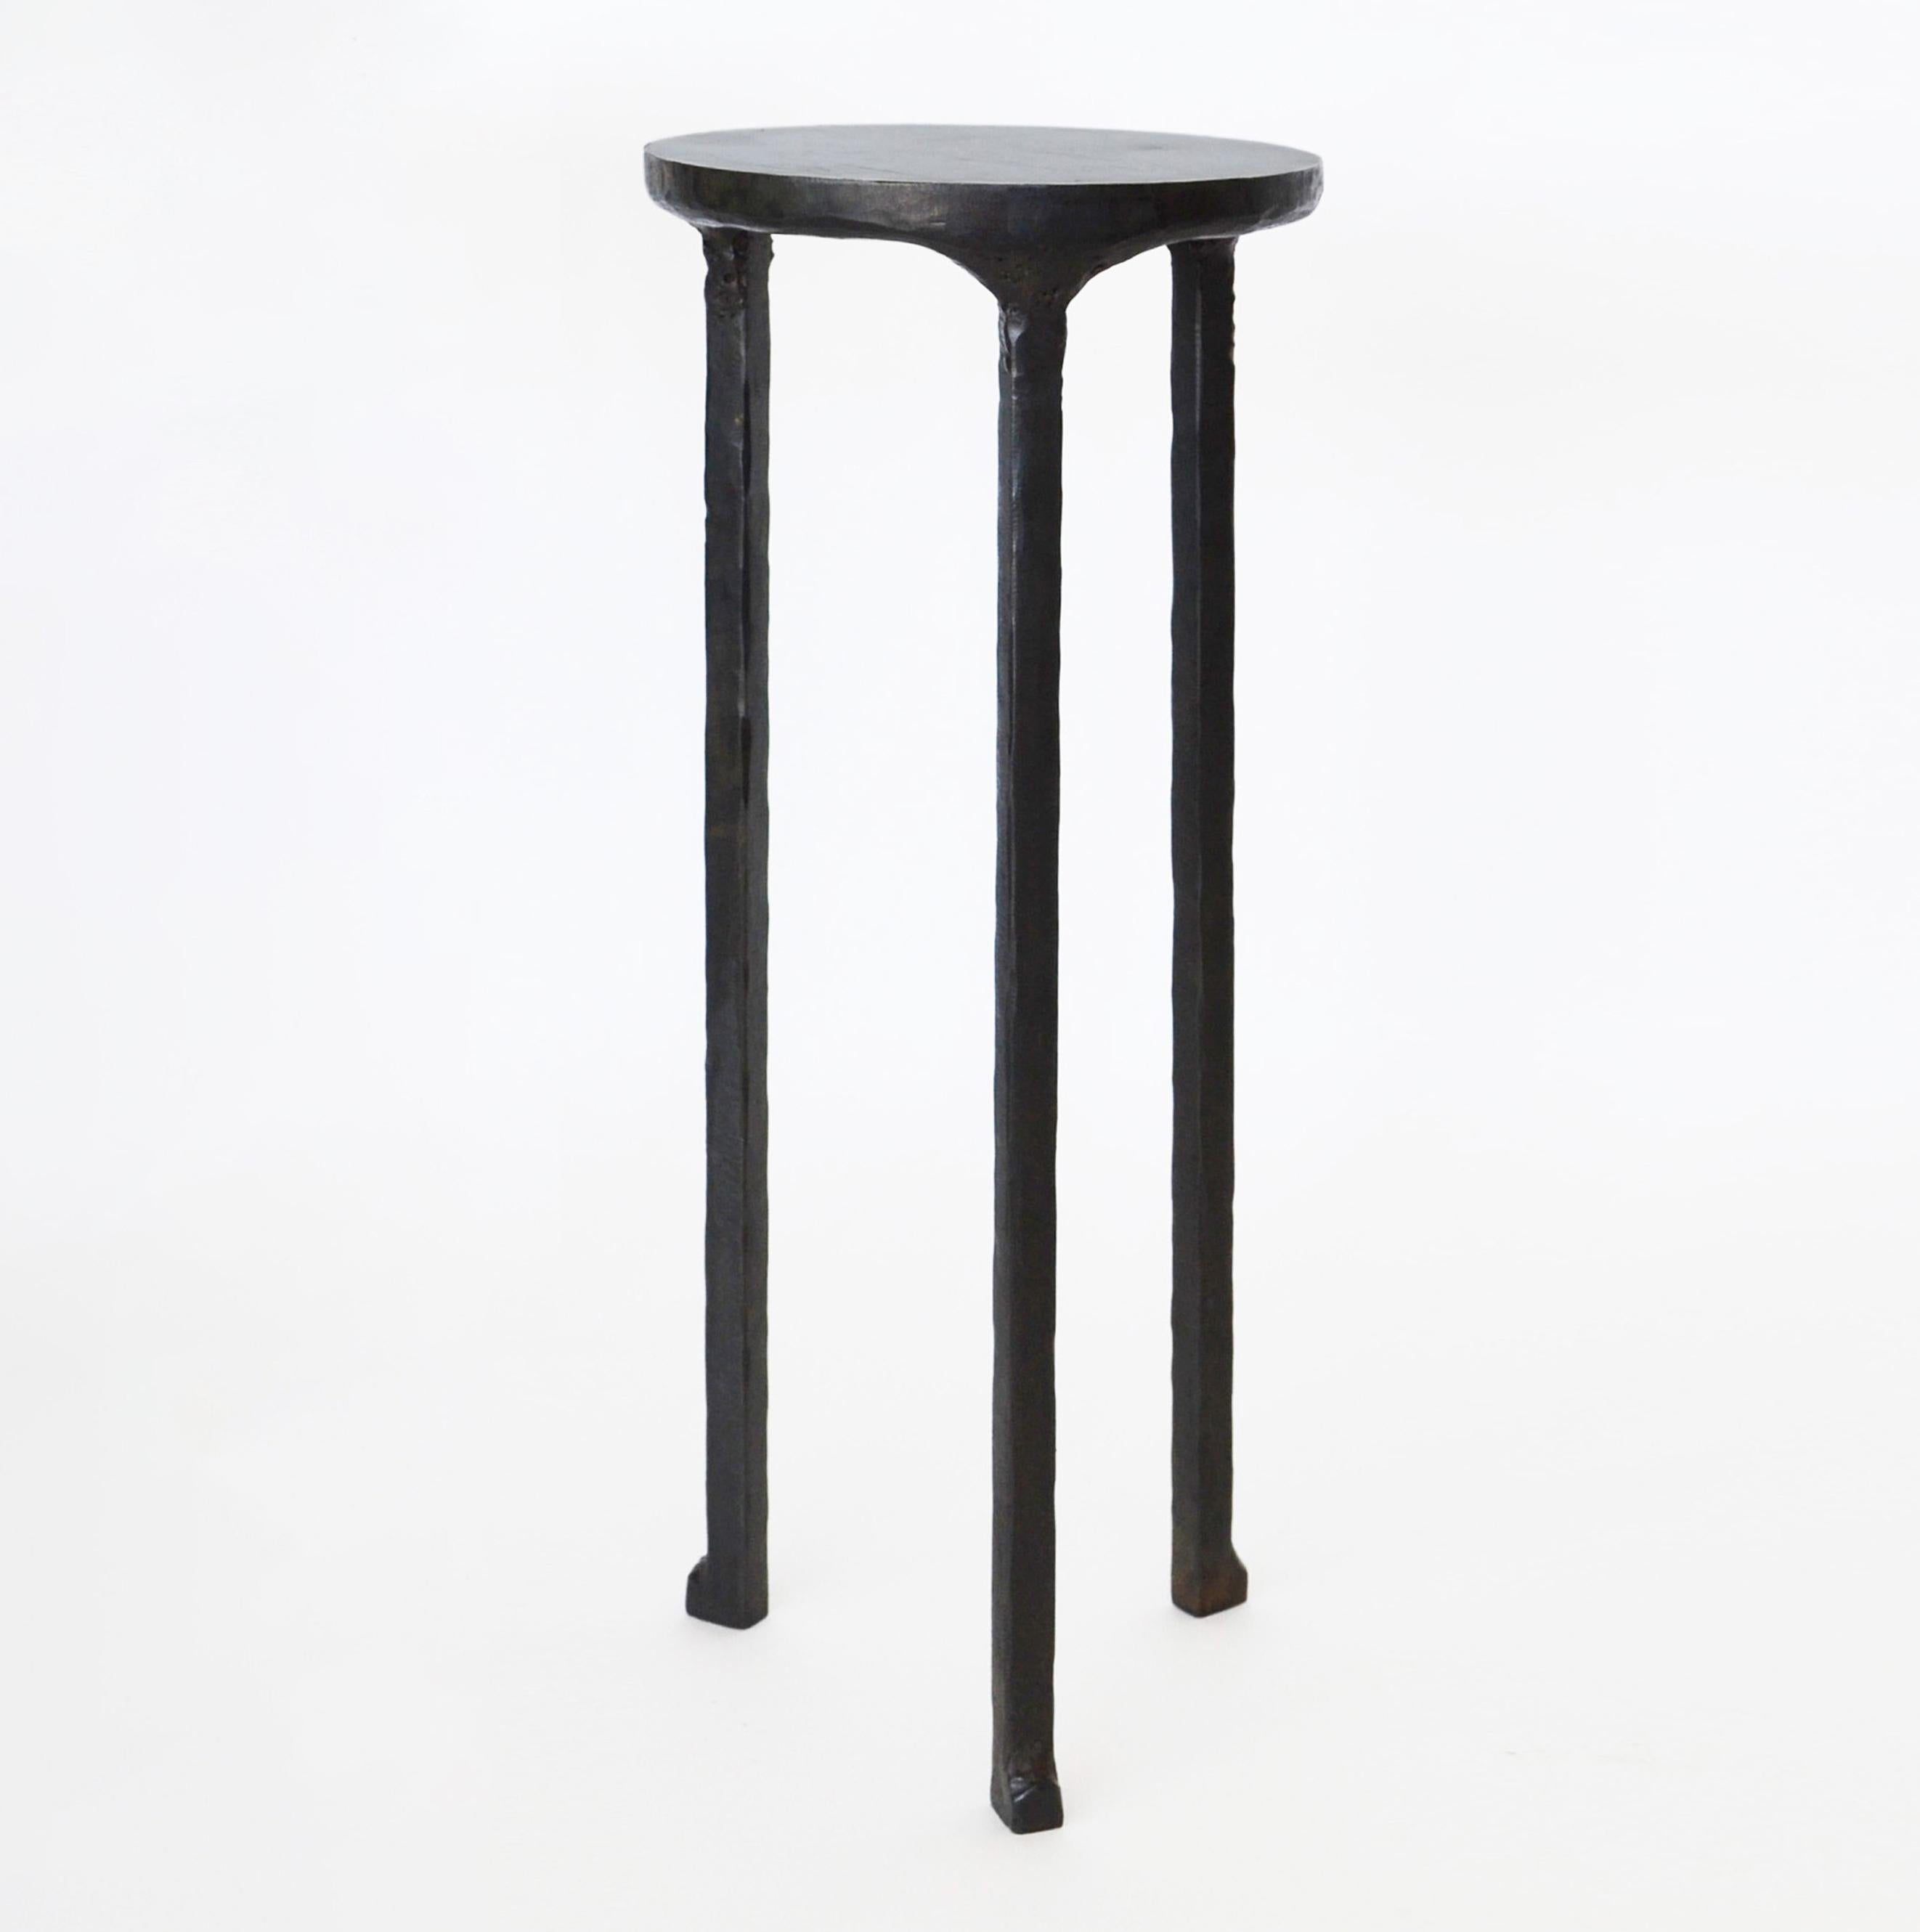 Table No. 3 small by JM Szymanski
Dimensions: L 8” x W 8” x H 20”
Materials: Blackened waxed steel

The perfect side table! A sculpted bottom frame supports a smooth top surface that is ideal for drinks and small items. The small size makes this